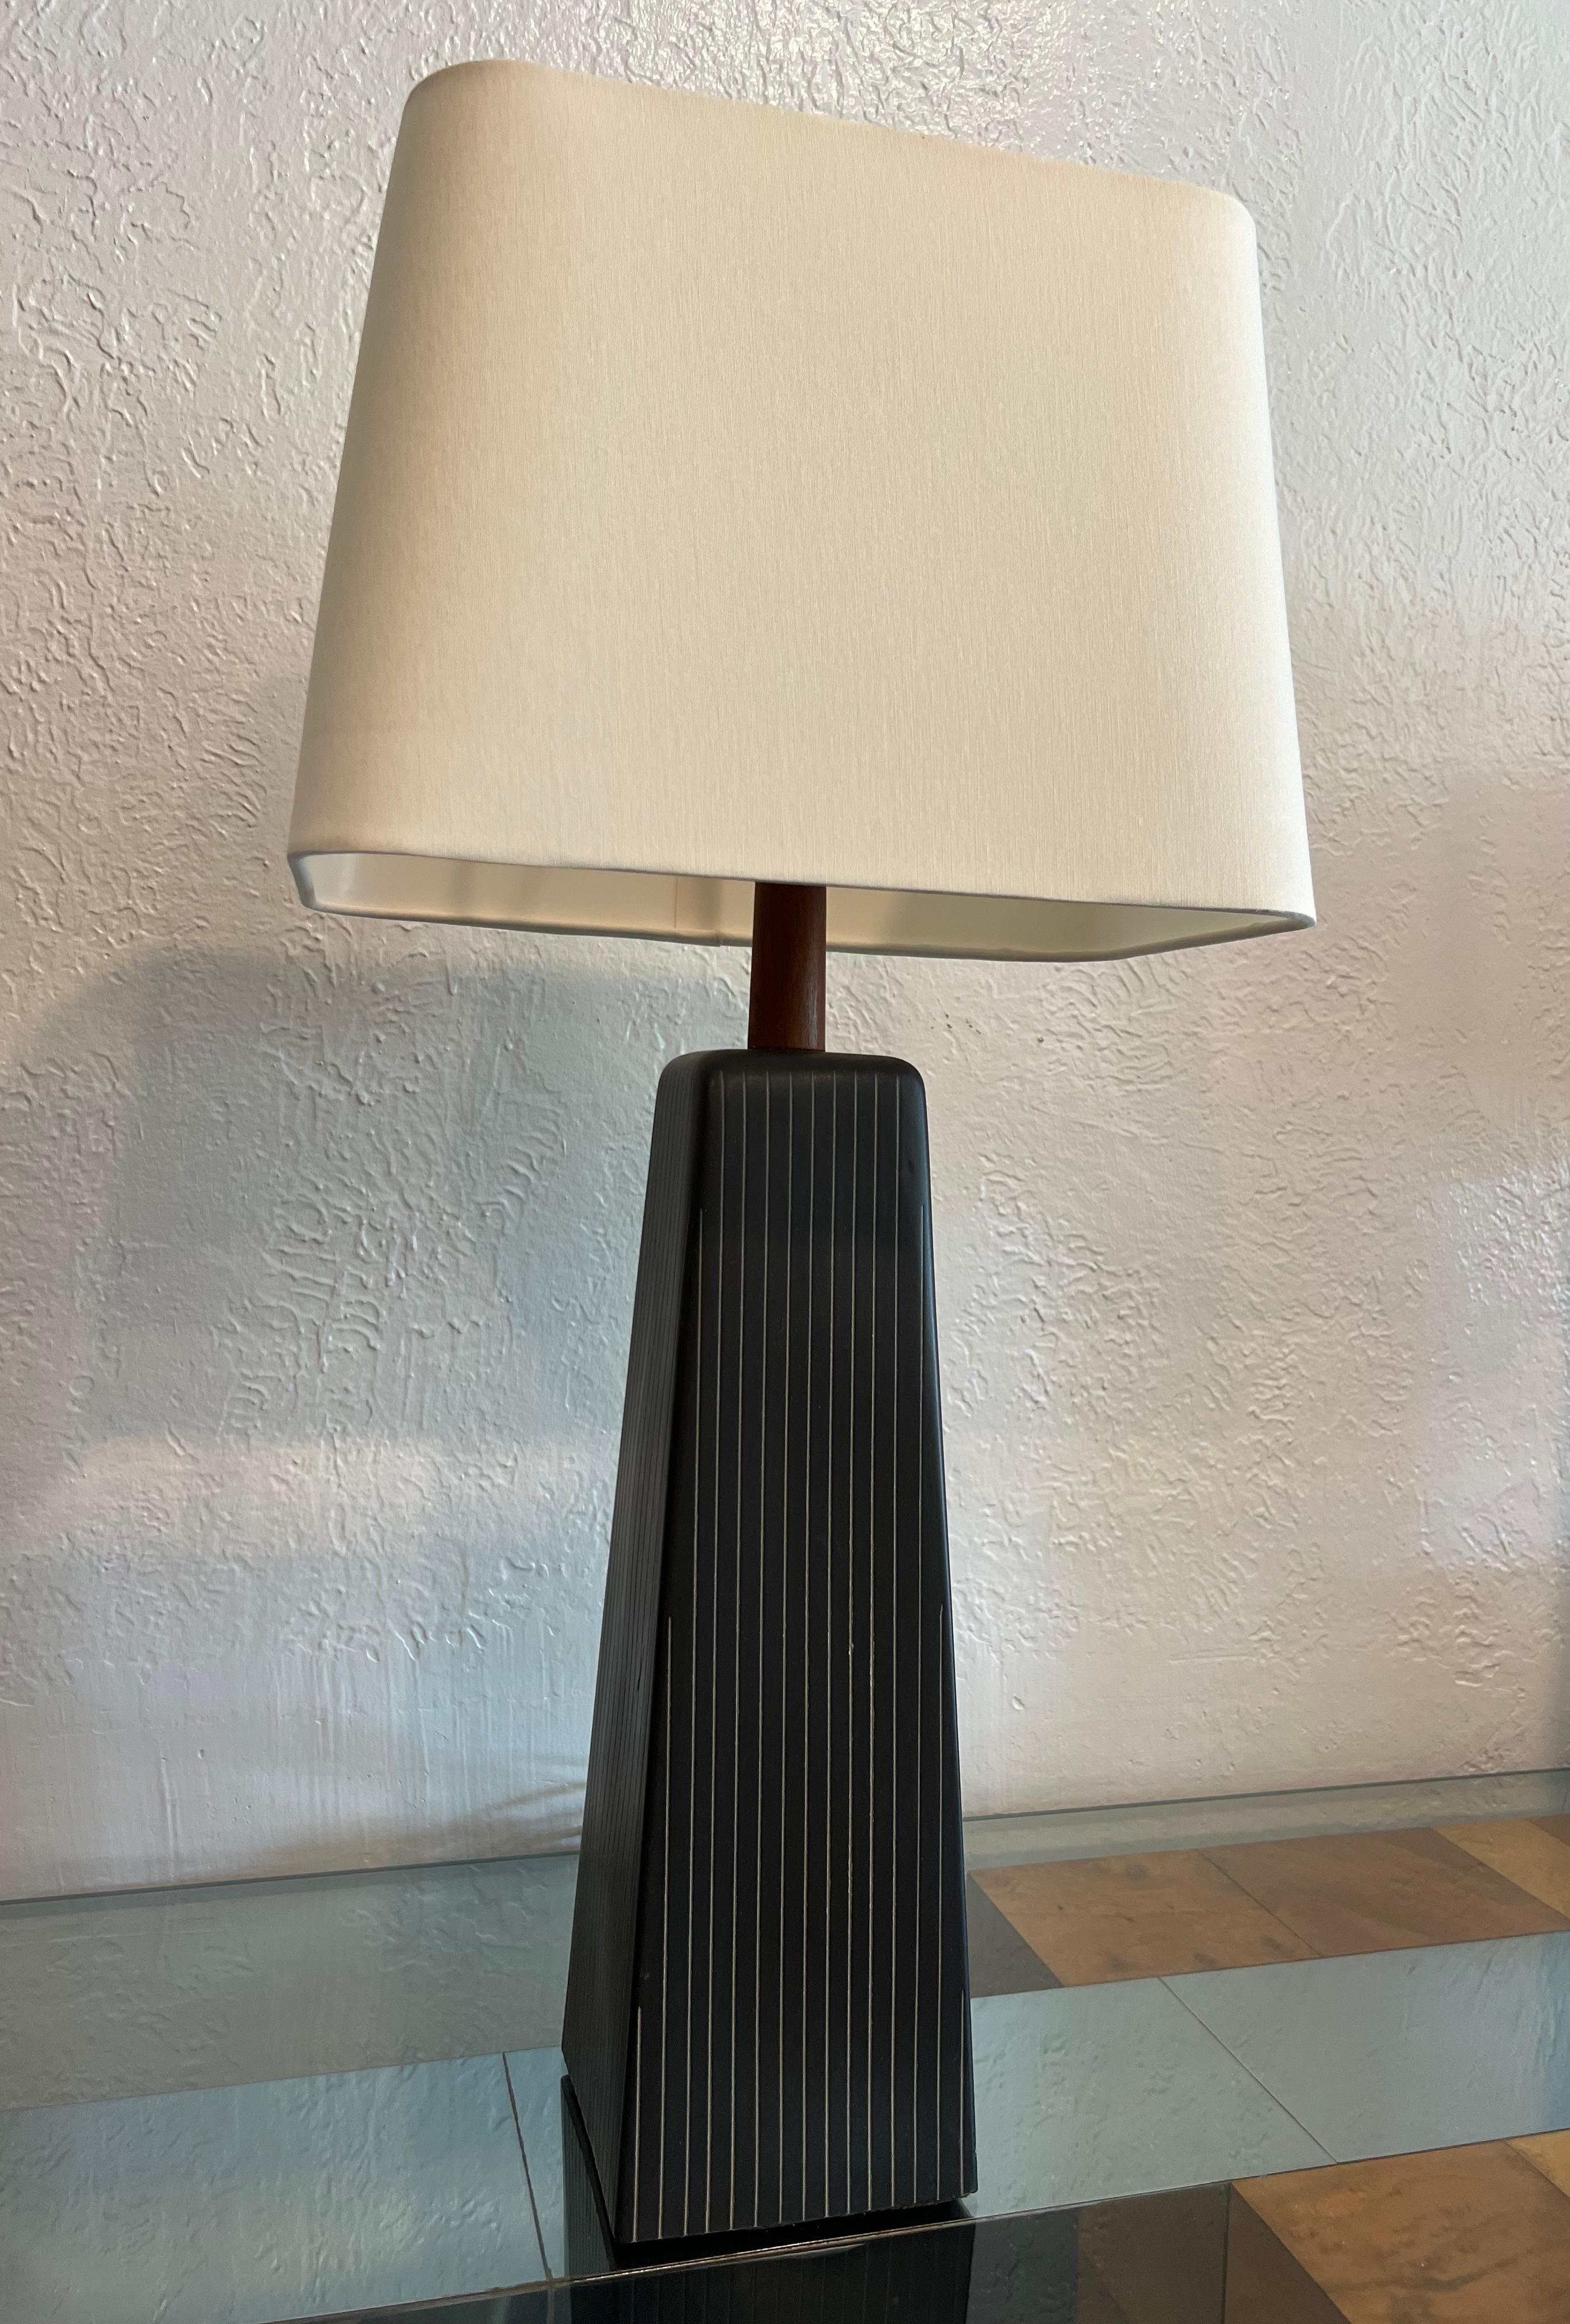 Jane and Gordon Martz tapered ceramic table lamp. Fitted with a new shade. Original socket and wiring (please refer to photos). Additional photos available upon request. 

Overall measurements: 29H 14W 9D 
Ceramic portion: 16.5H 5 1/4 square

Would